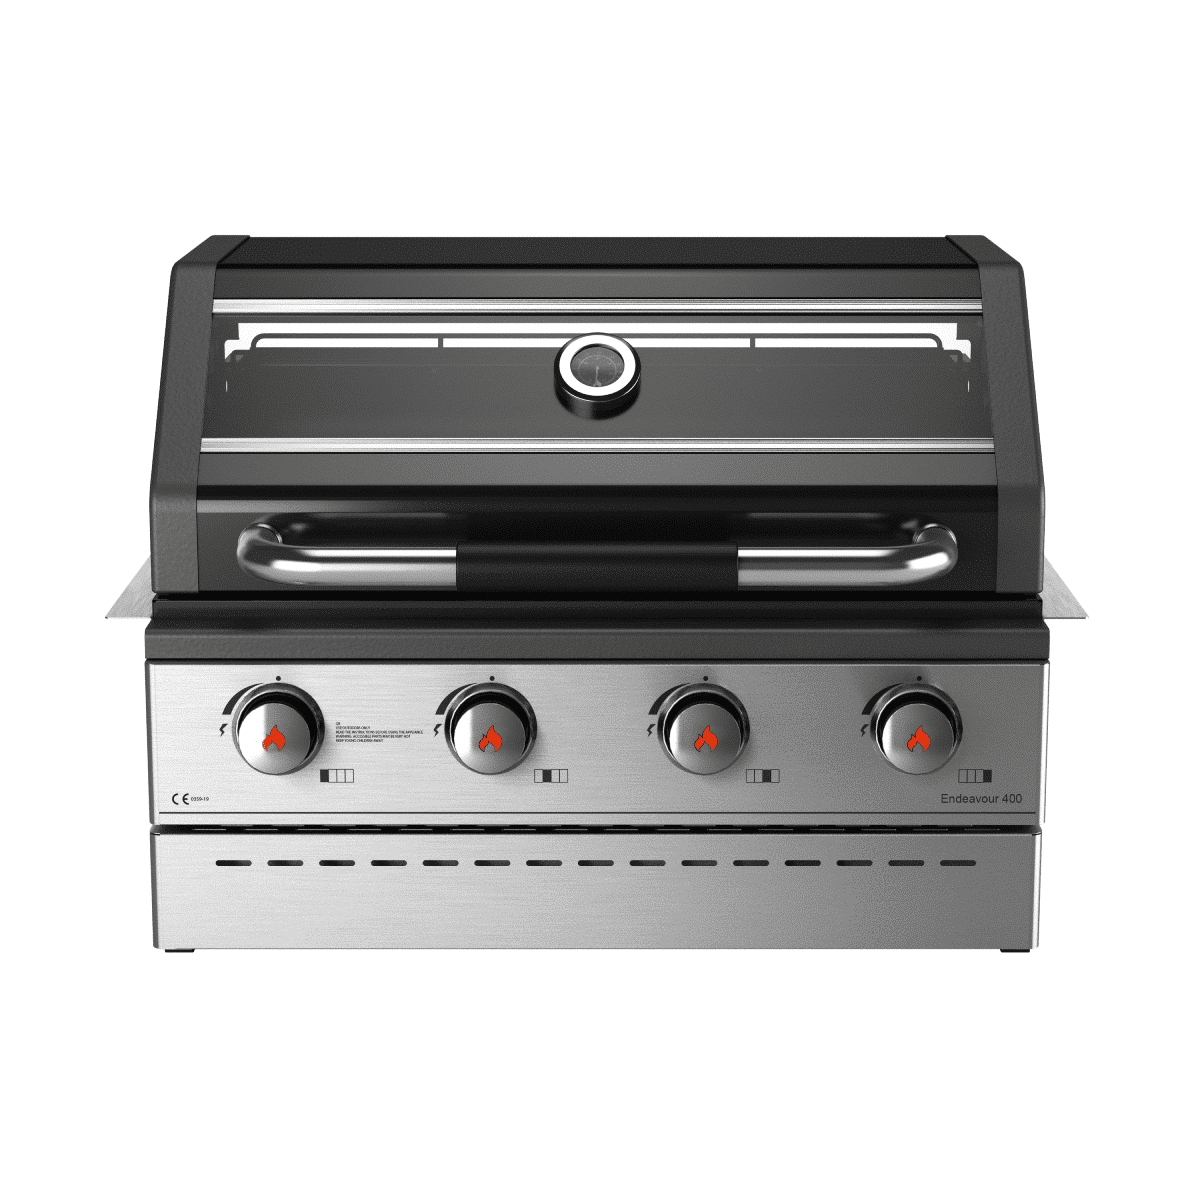 Fornetto - Ranger 400 inbouwbarbecue